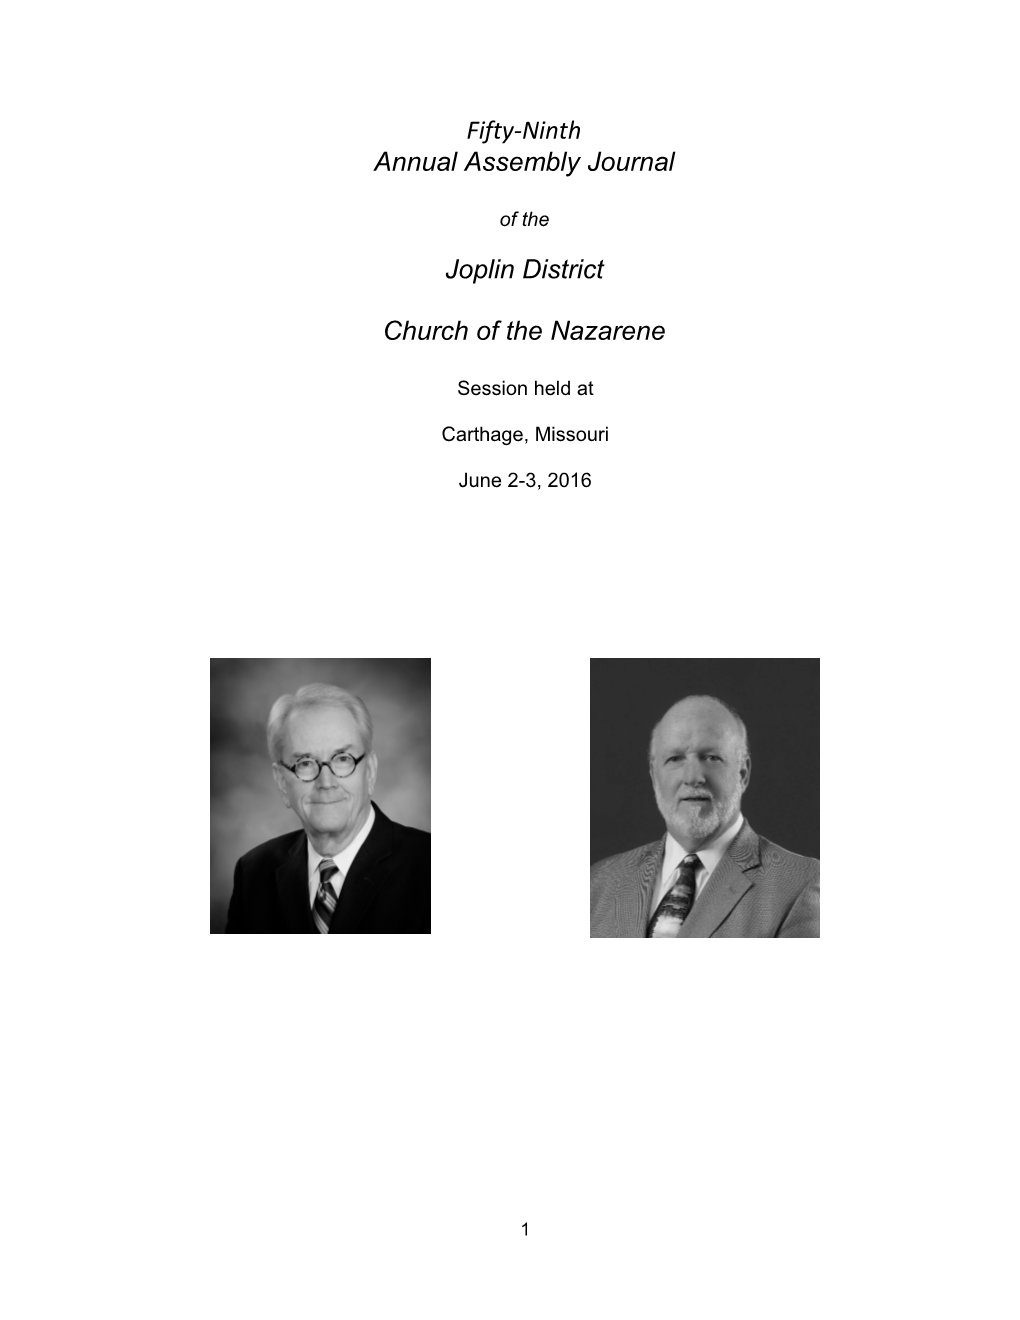 Annual Assembly Journal